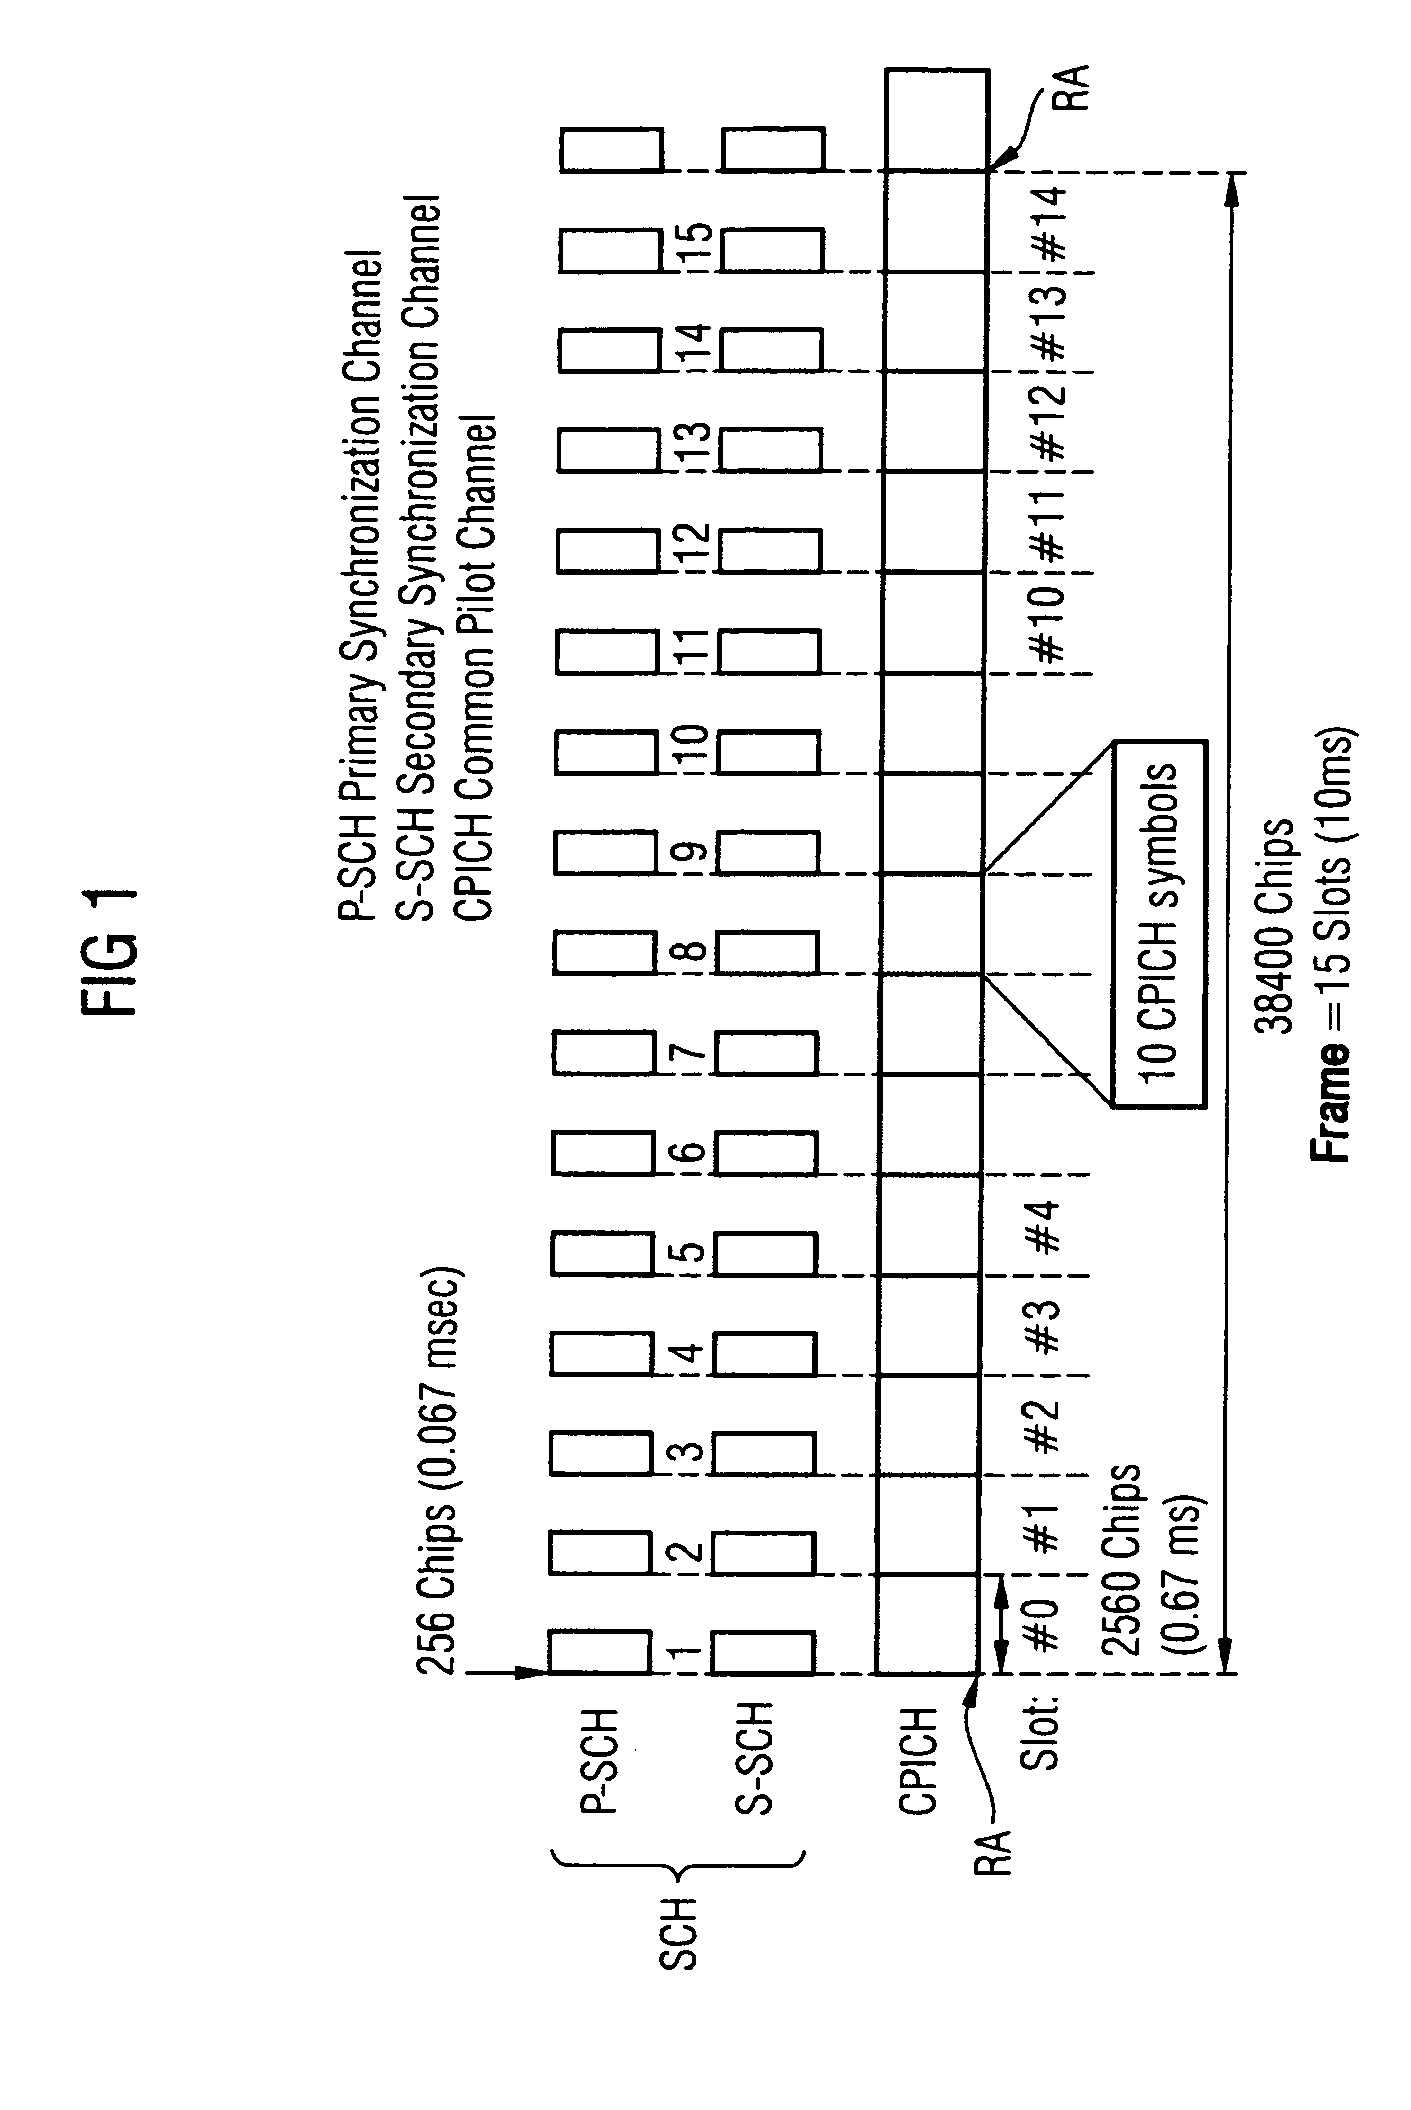 Method and apparatus for synchronization of a mobile radio receiver to a base station